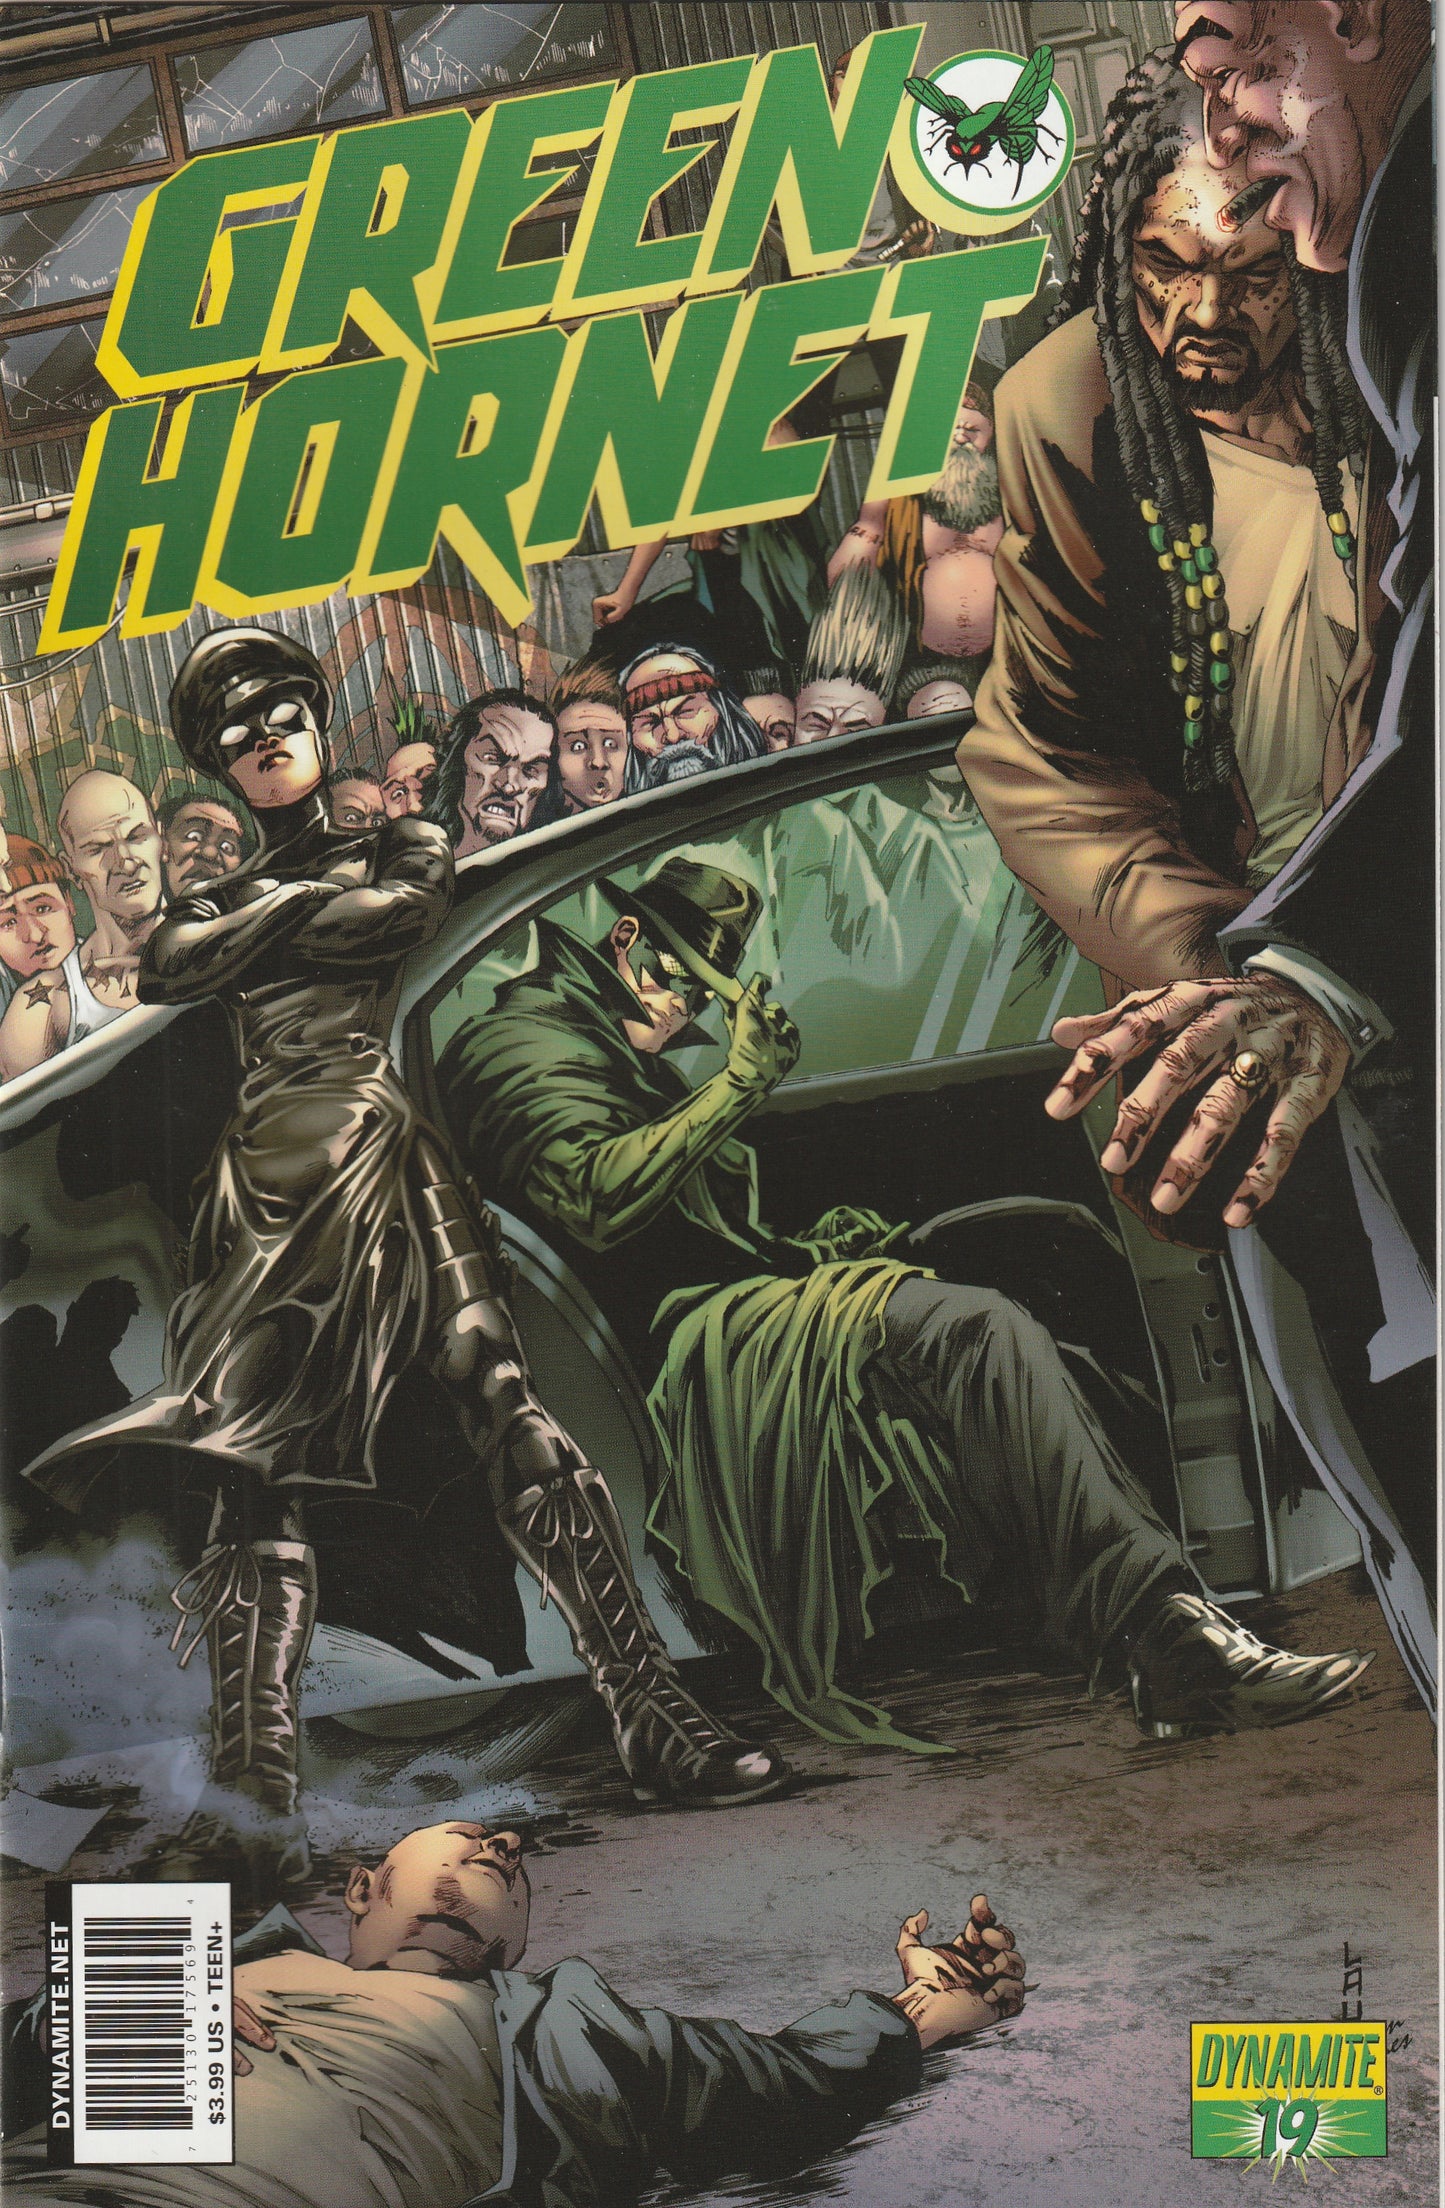 Green Hornet #19 (2011) - Cover by Jonathan Lau